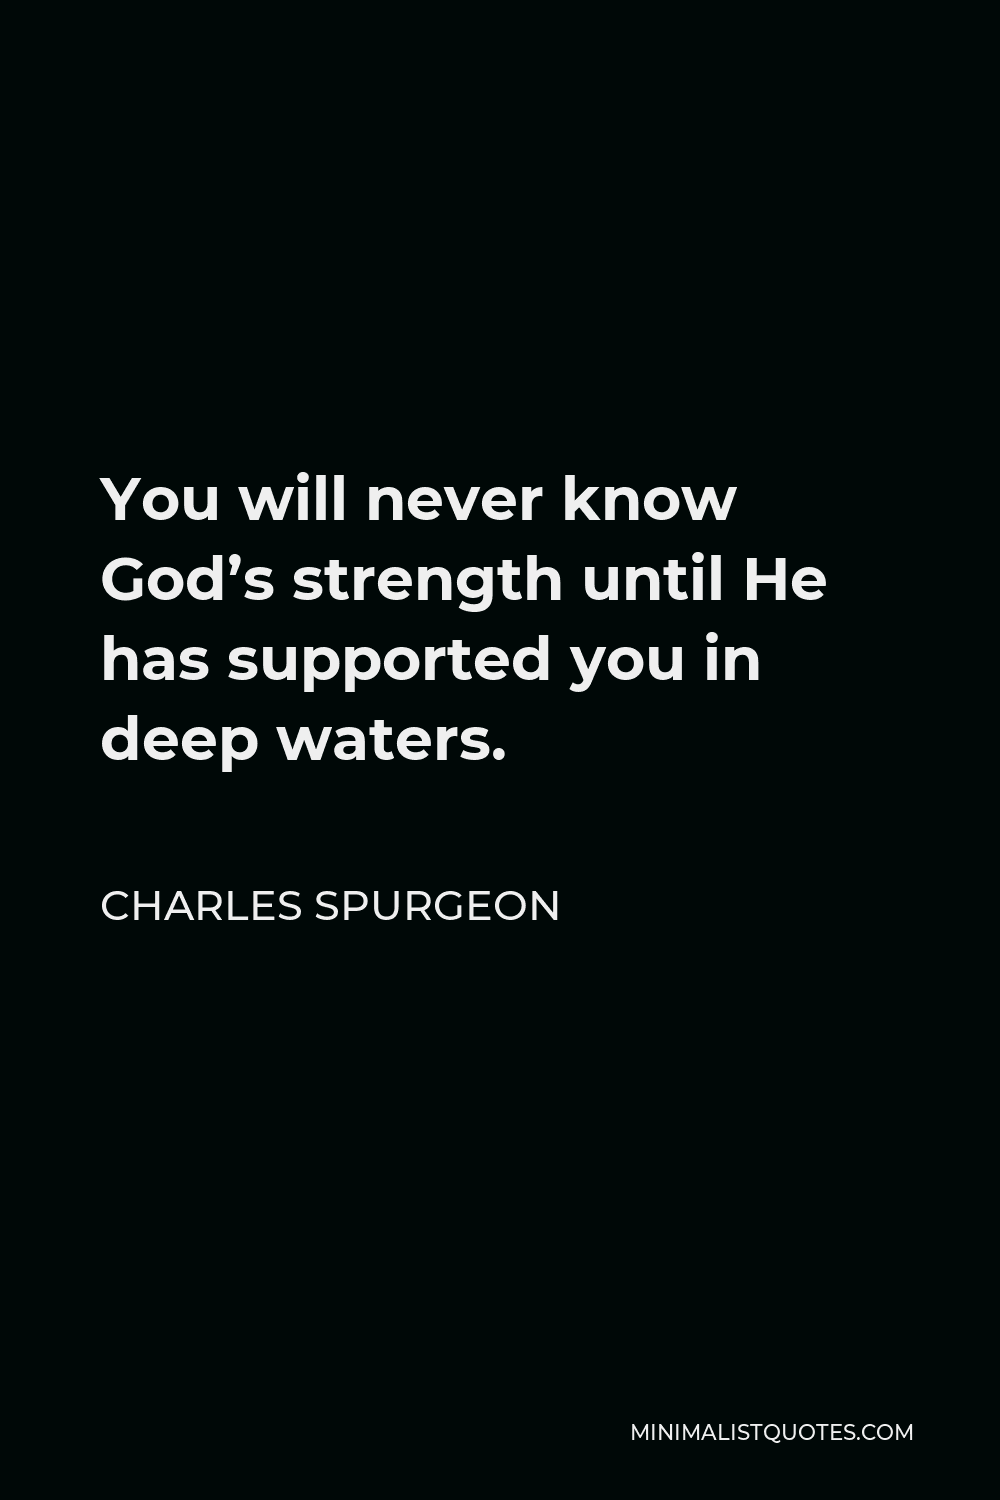 Charles Spurgeon Quote - You will never know God’s strength until He has supported you in deep waters.